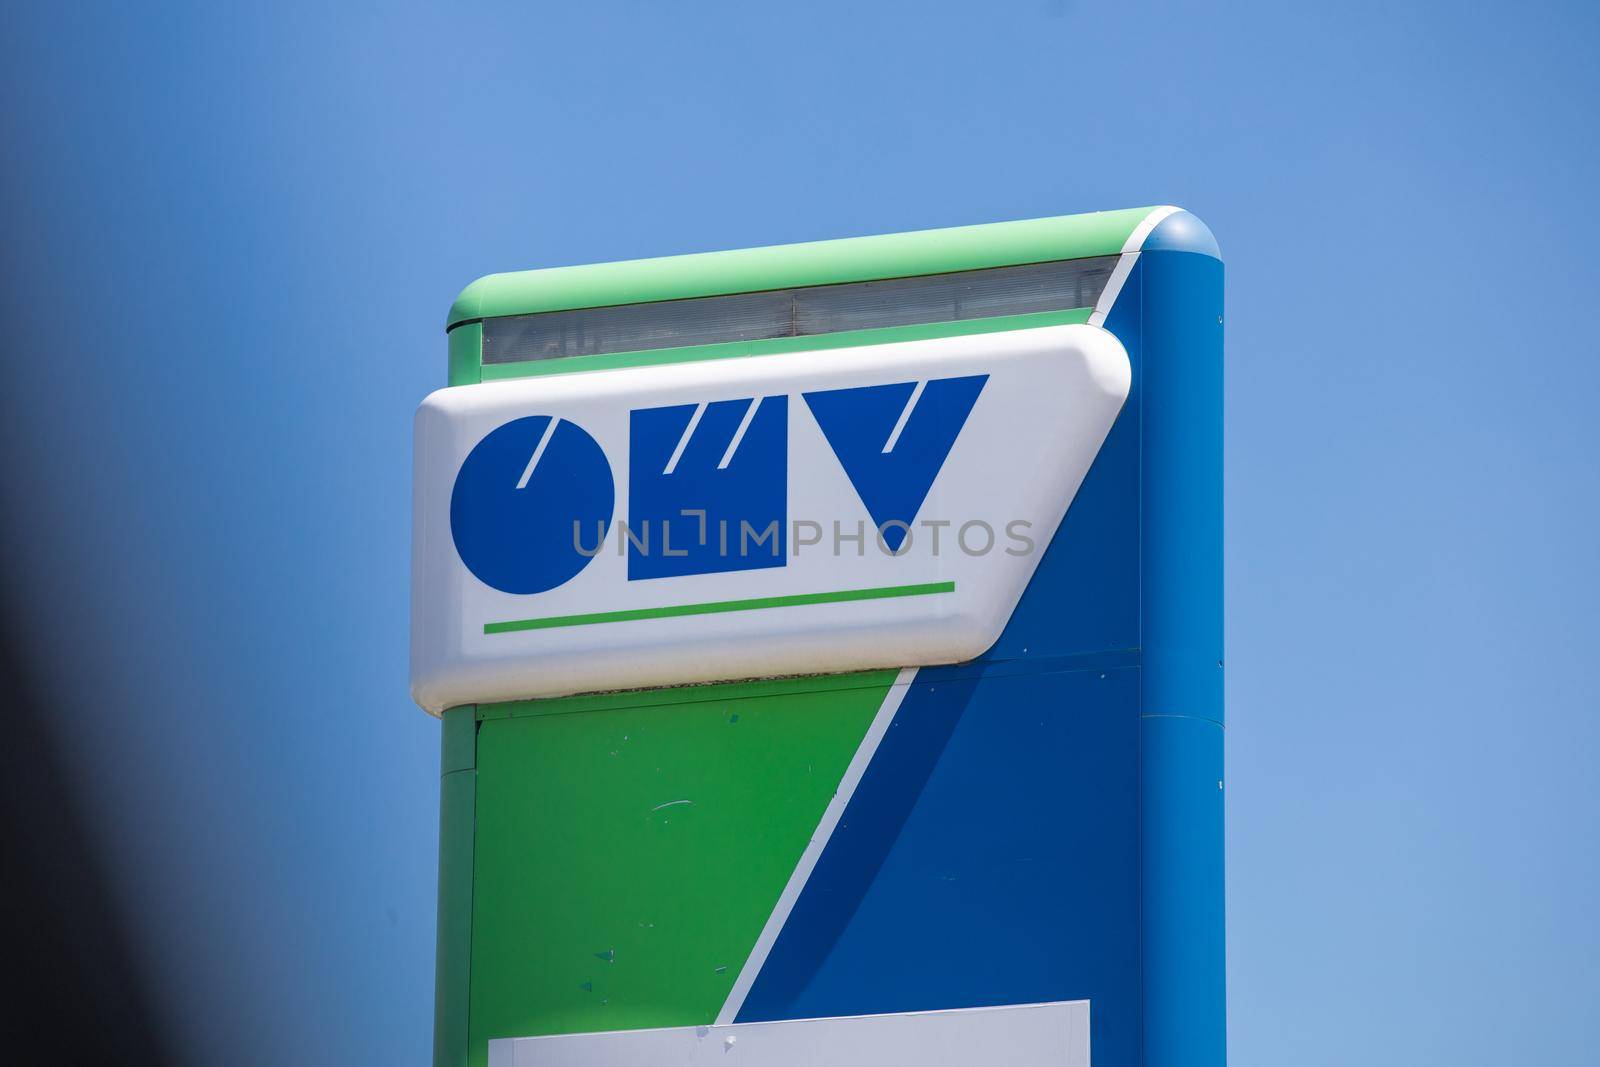 Lazarevac, Serbia - June 20, 2022: Logo and sign of OMV on gas station. OMV is a Hungarian-owned oil company operating in Serbia